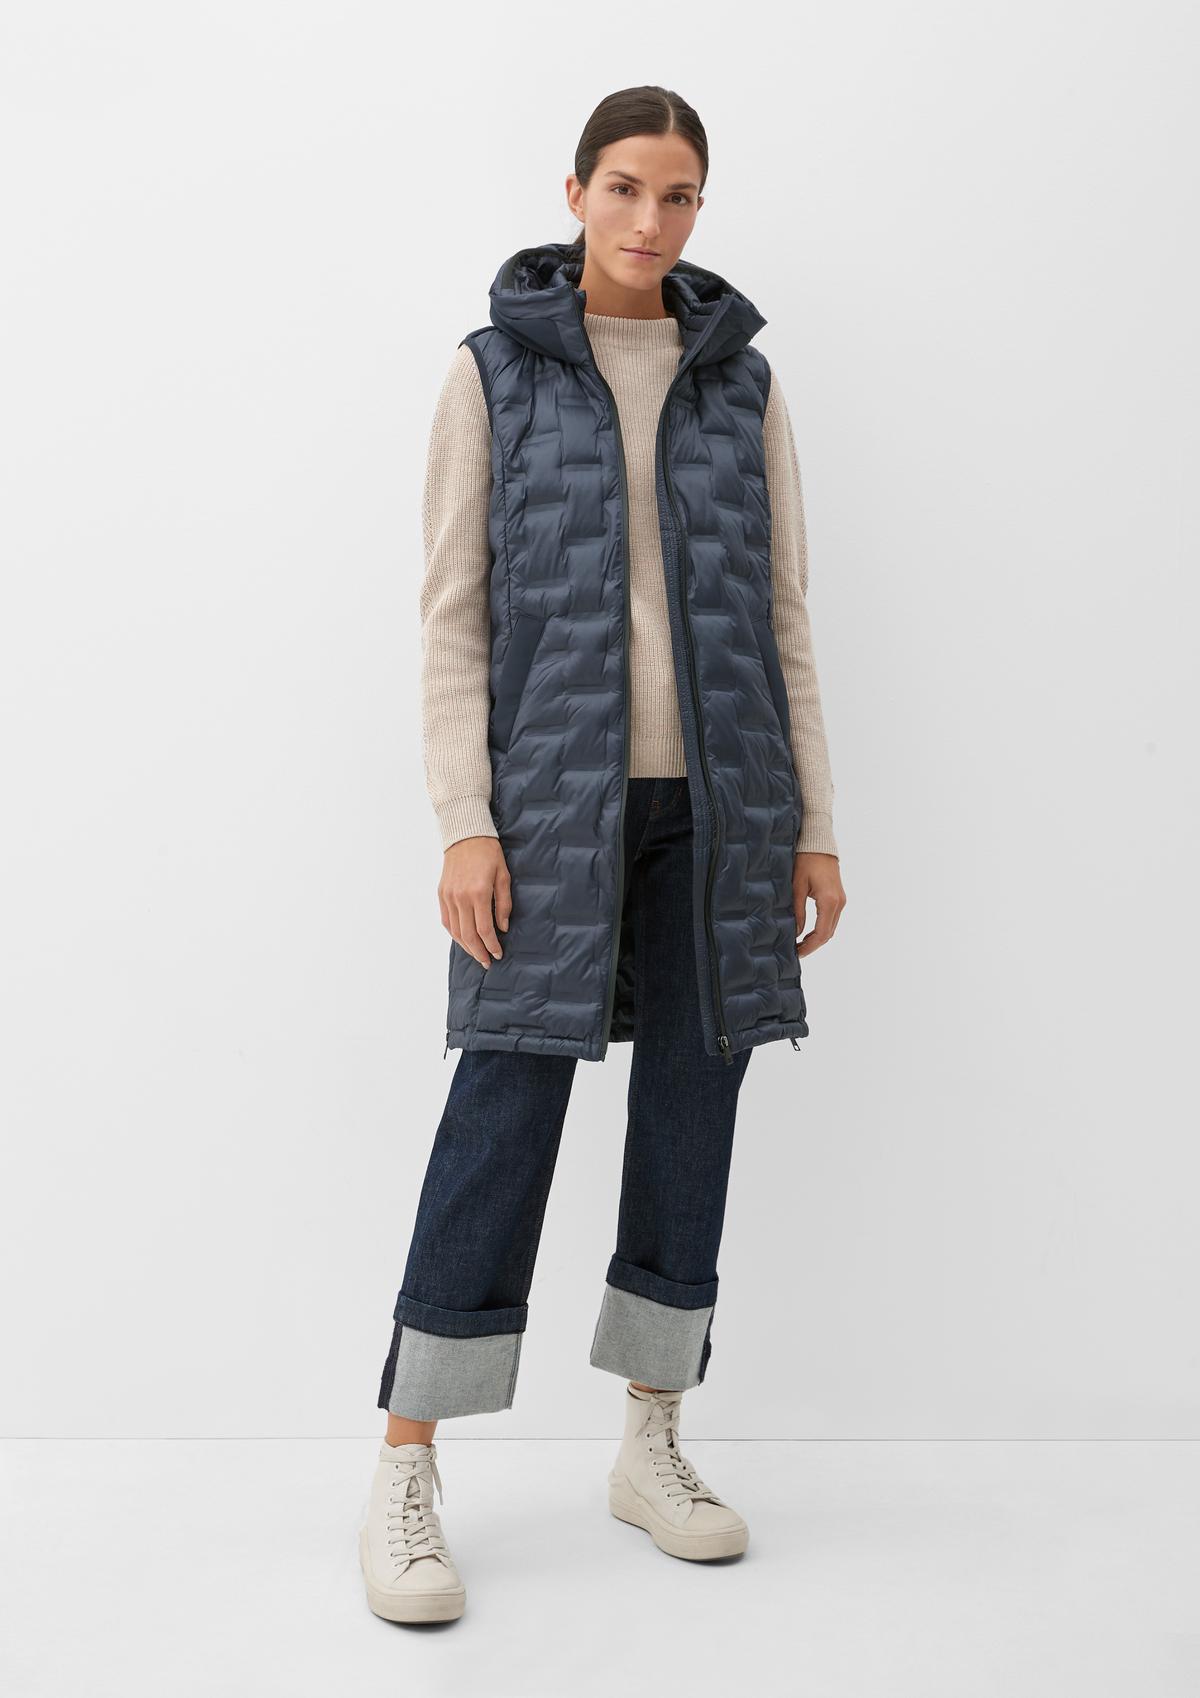 s.Oliver Long body warmer with quilting